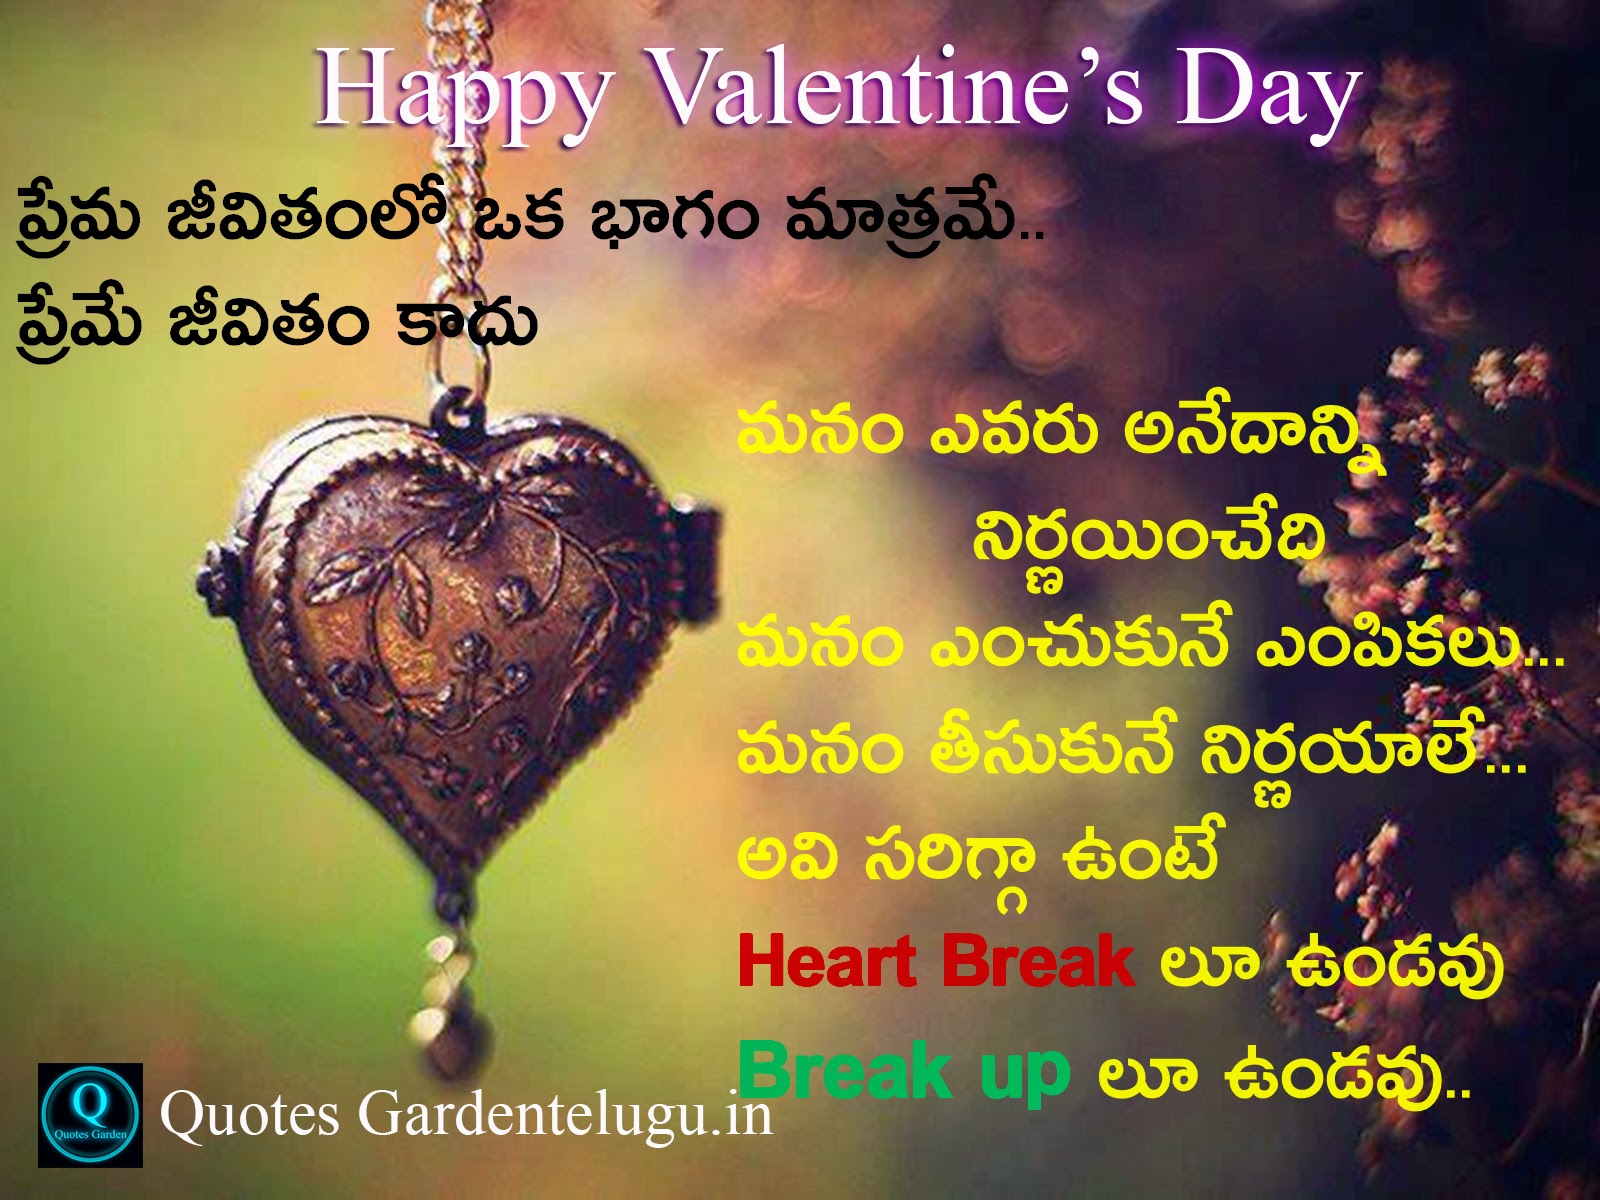 Valentine's Day Special Love Quotes Images photoes Greetings Wishes HD  Wallpapers | QUOTES GARDEN TELUGU | Telugu Quotes | English Quotes | Hindi  Quotes |